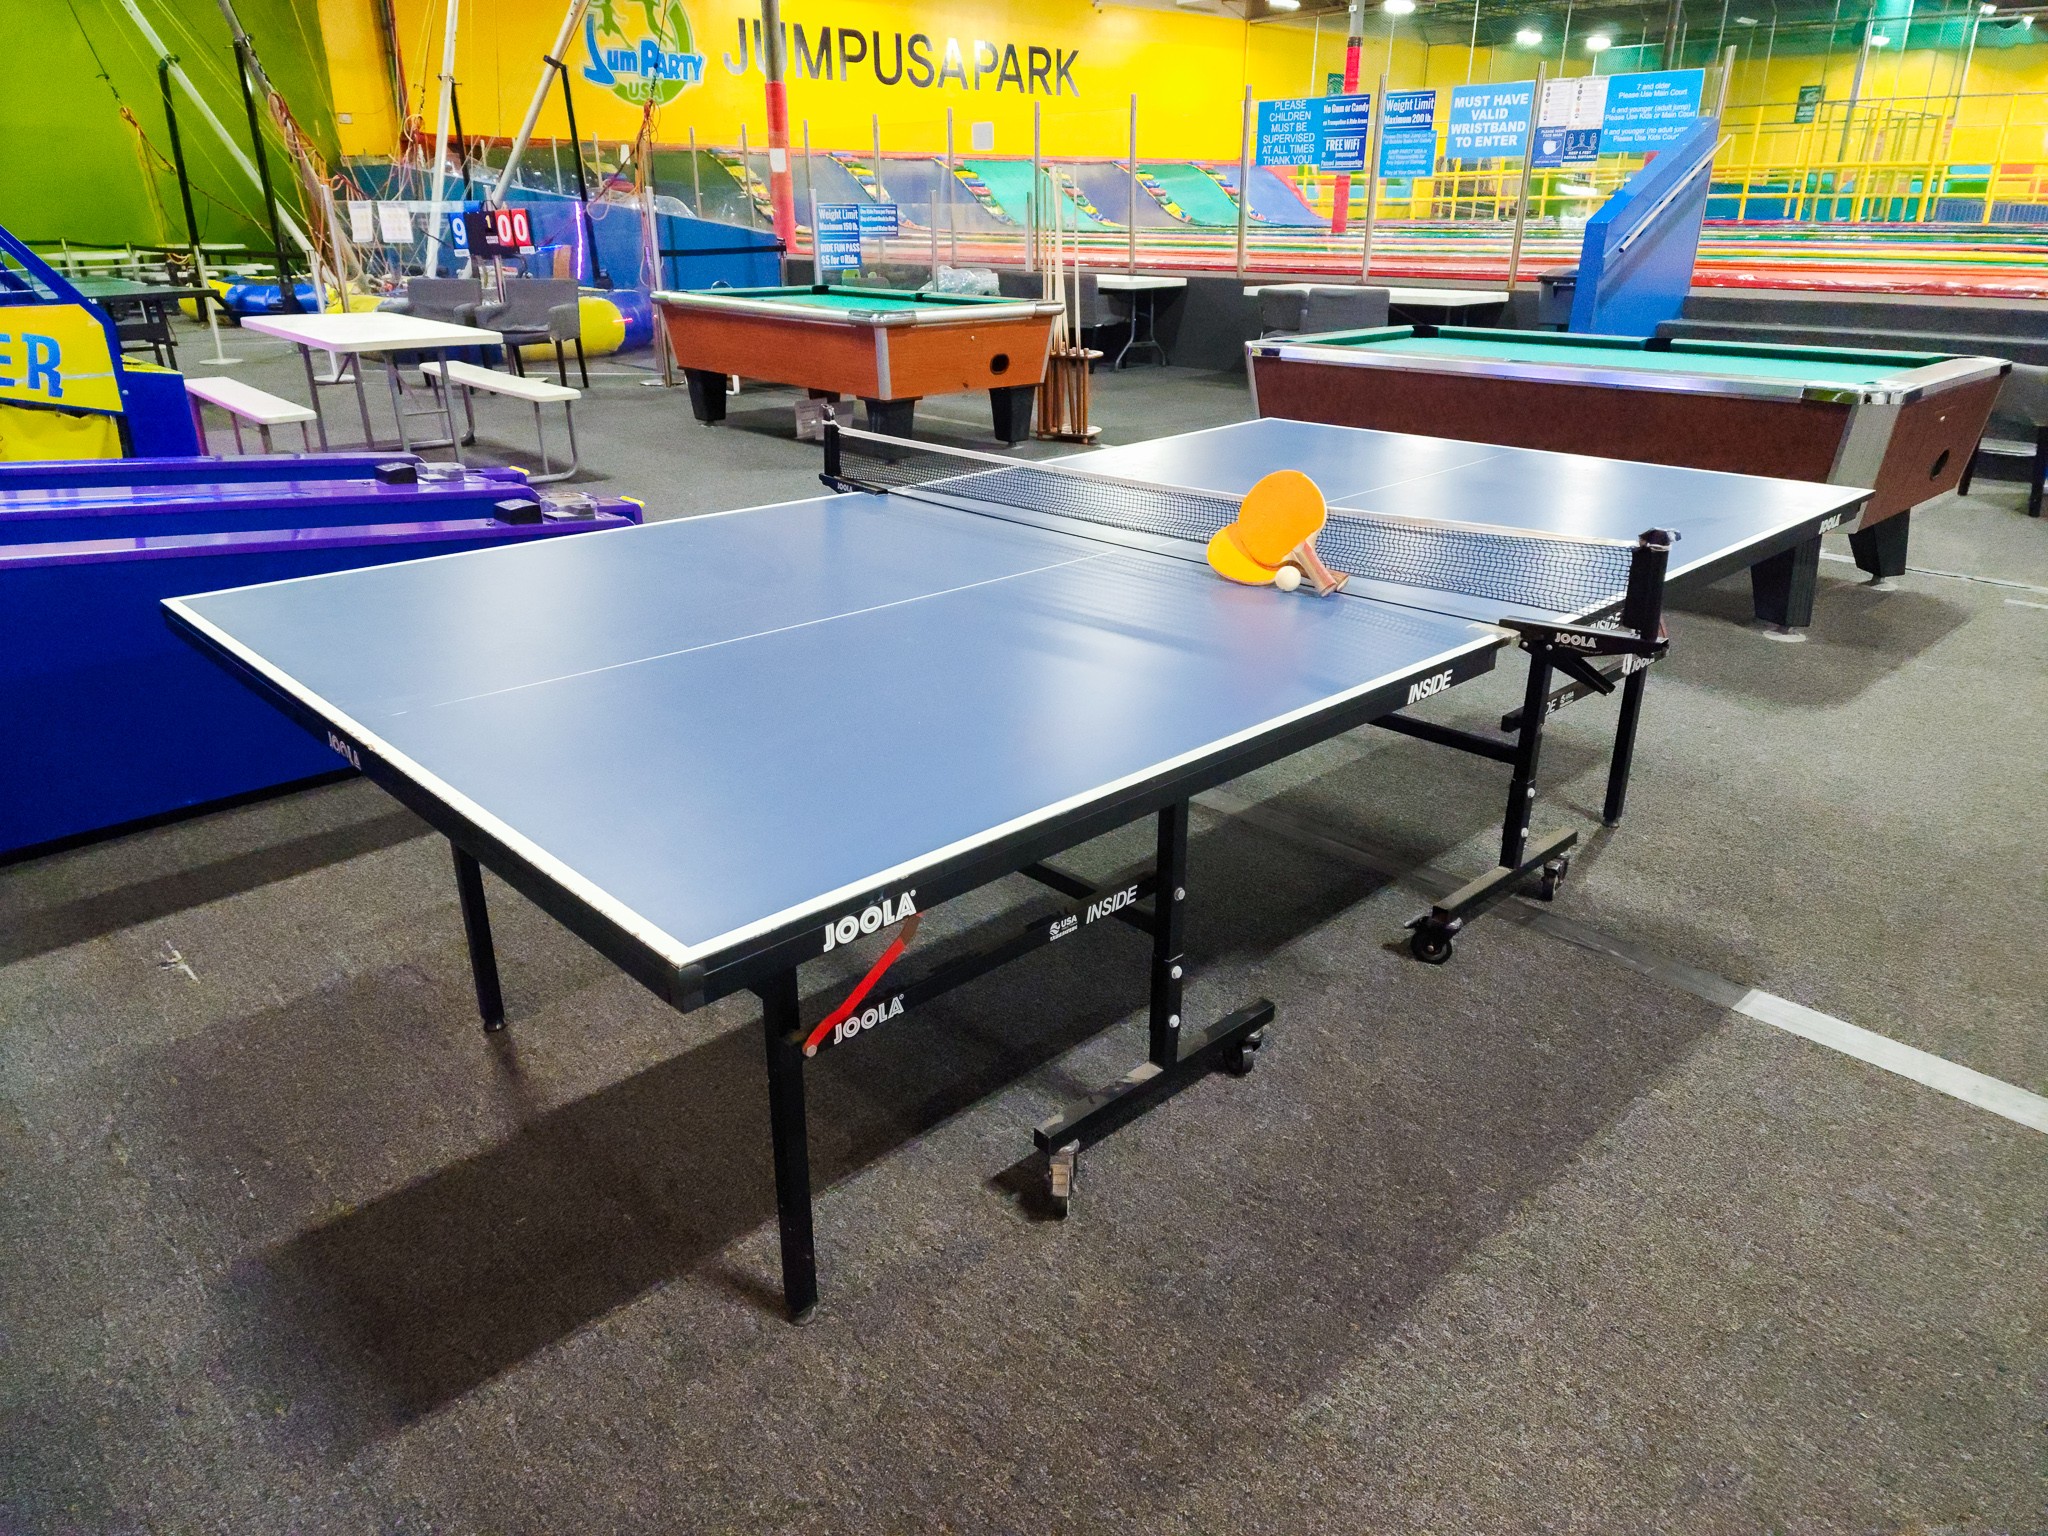 Jump Party USA has two Ping pong tables and ping pong paddles and ping pong ball